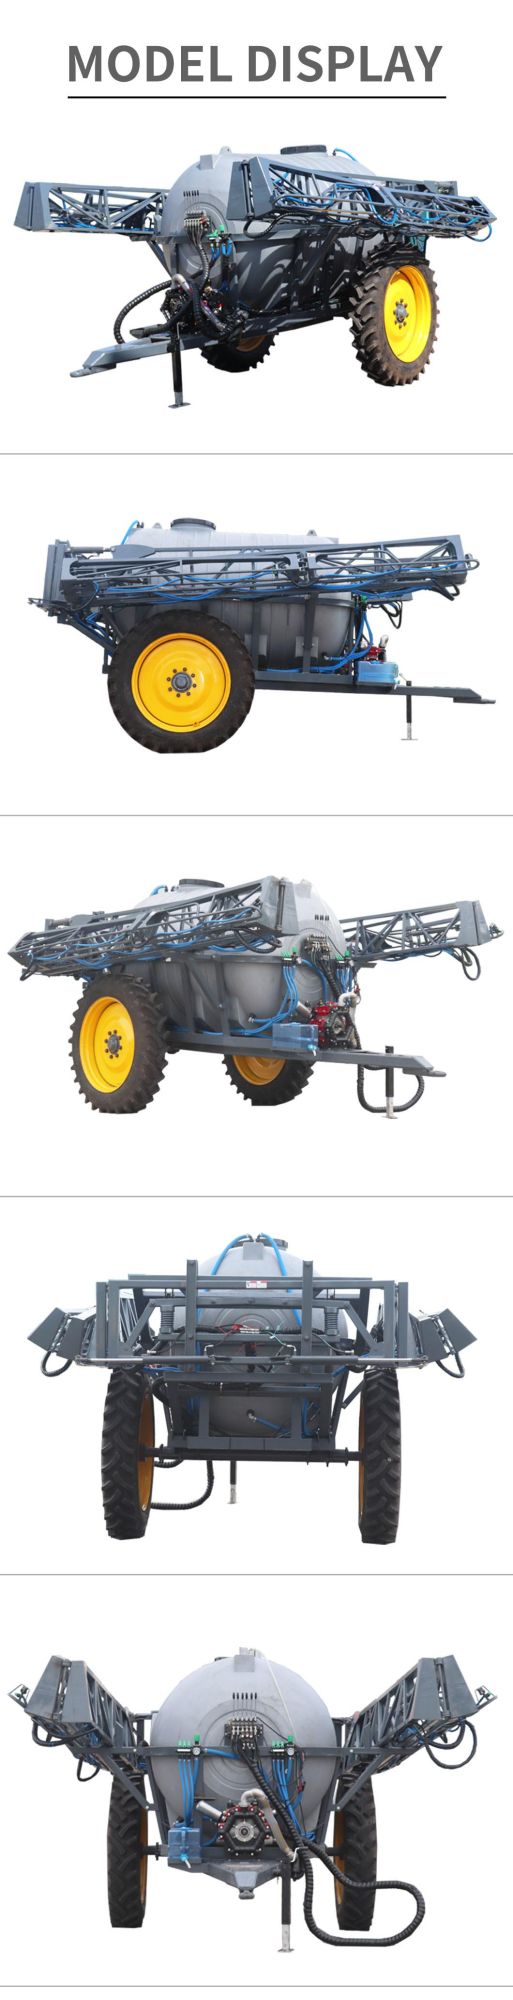 Agricultural Farm Pump Misting Machine Agriculture Machinery Garden Tractor Motorized Boom Sprayer